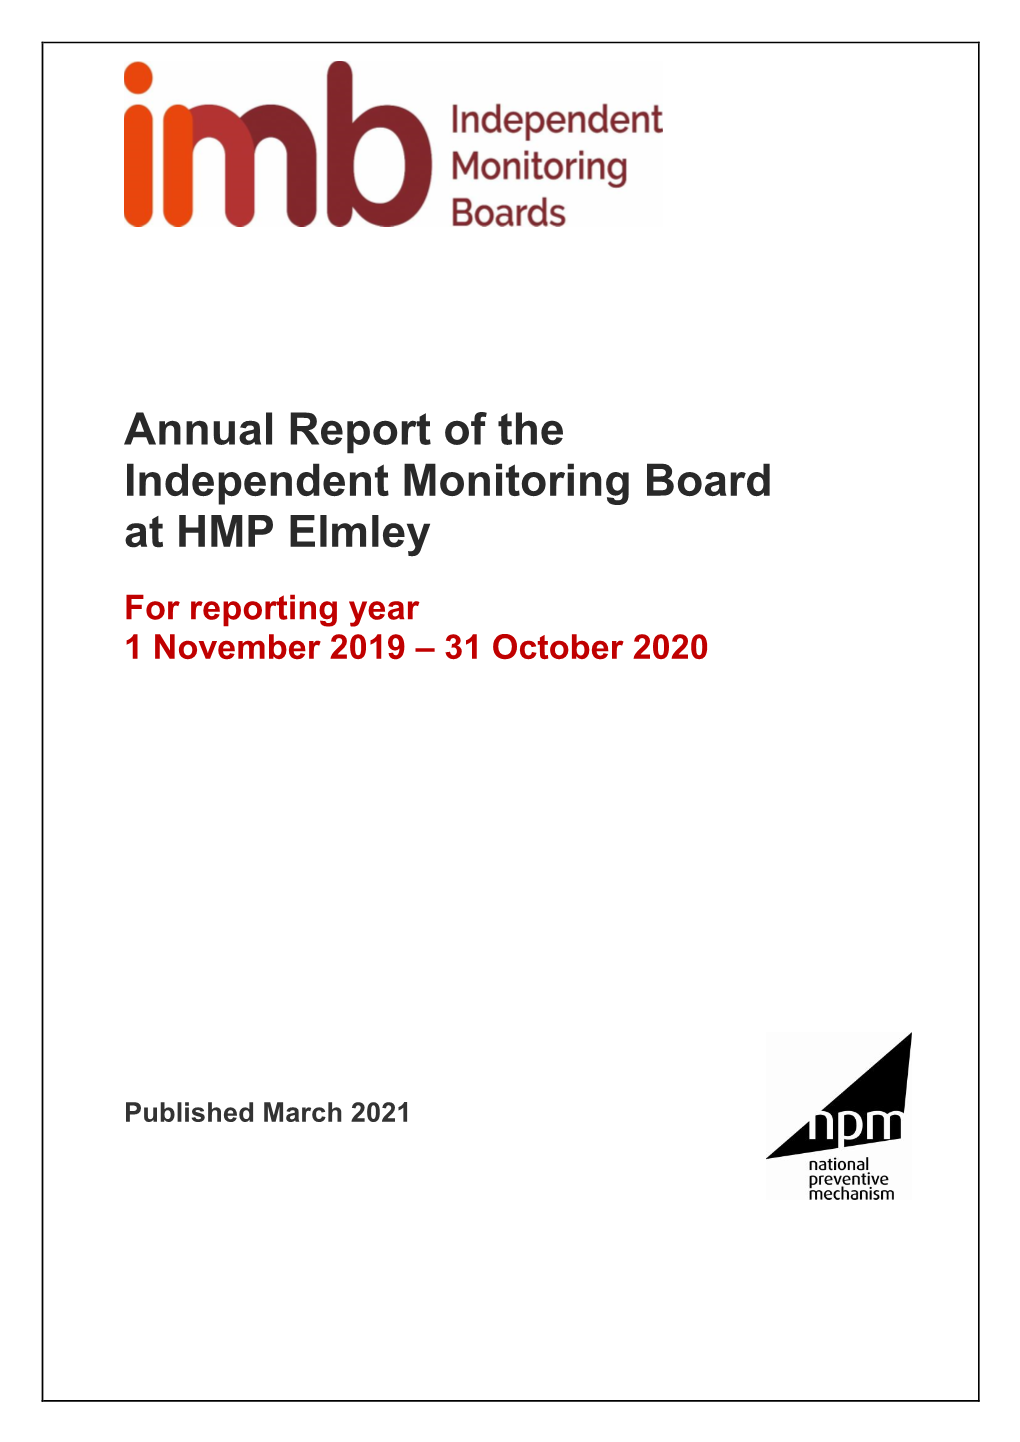 Annual Report of the Independent Monitoring Board at HMP Elmley